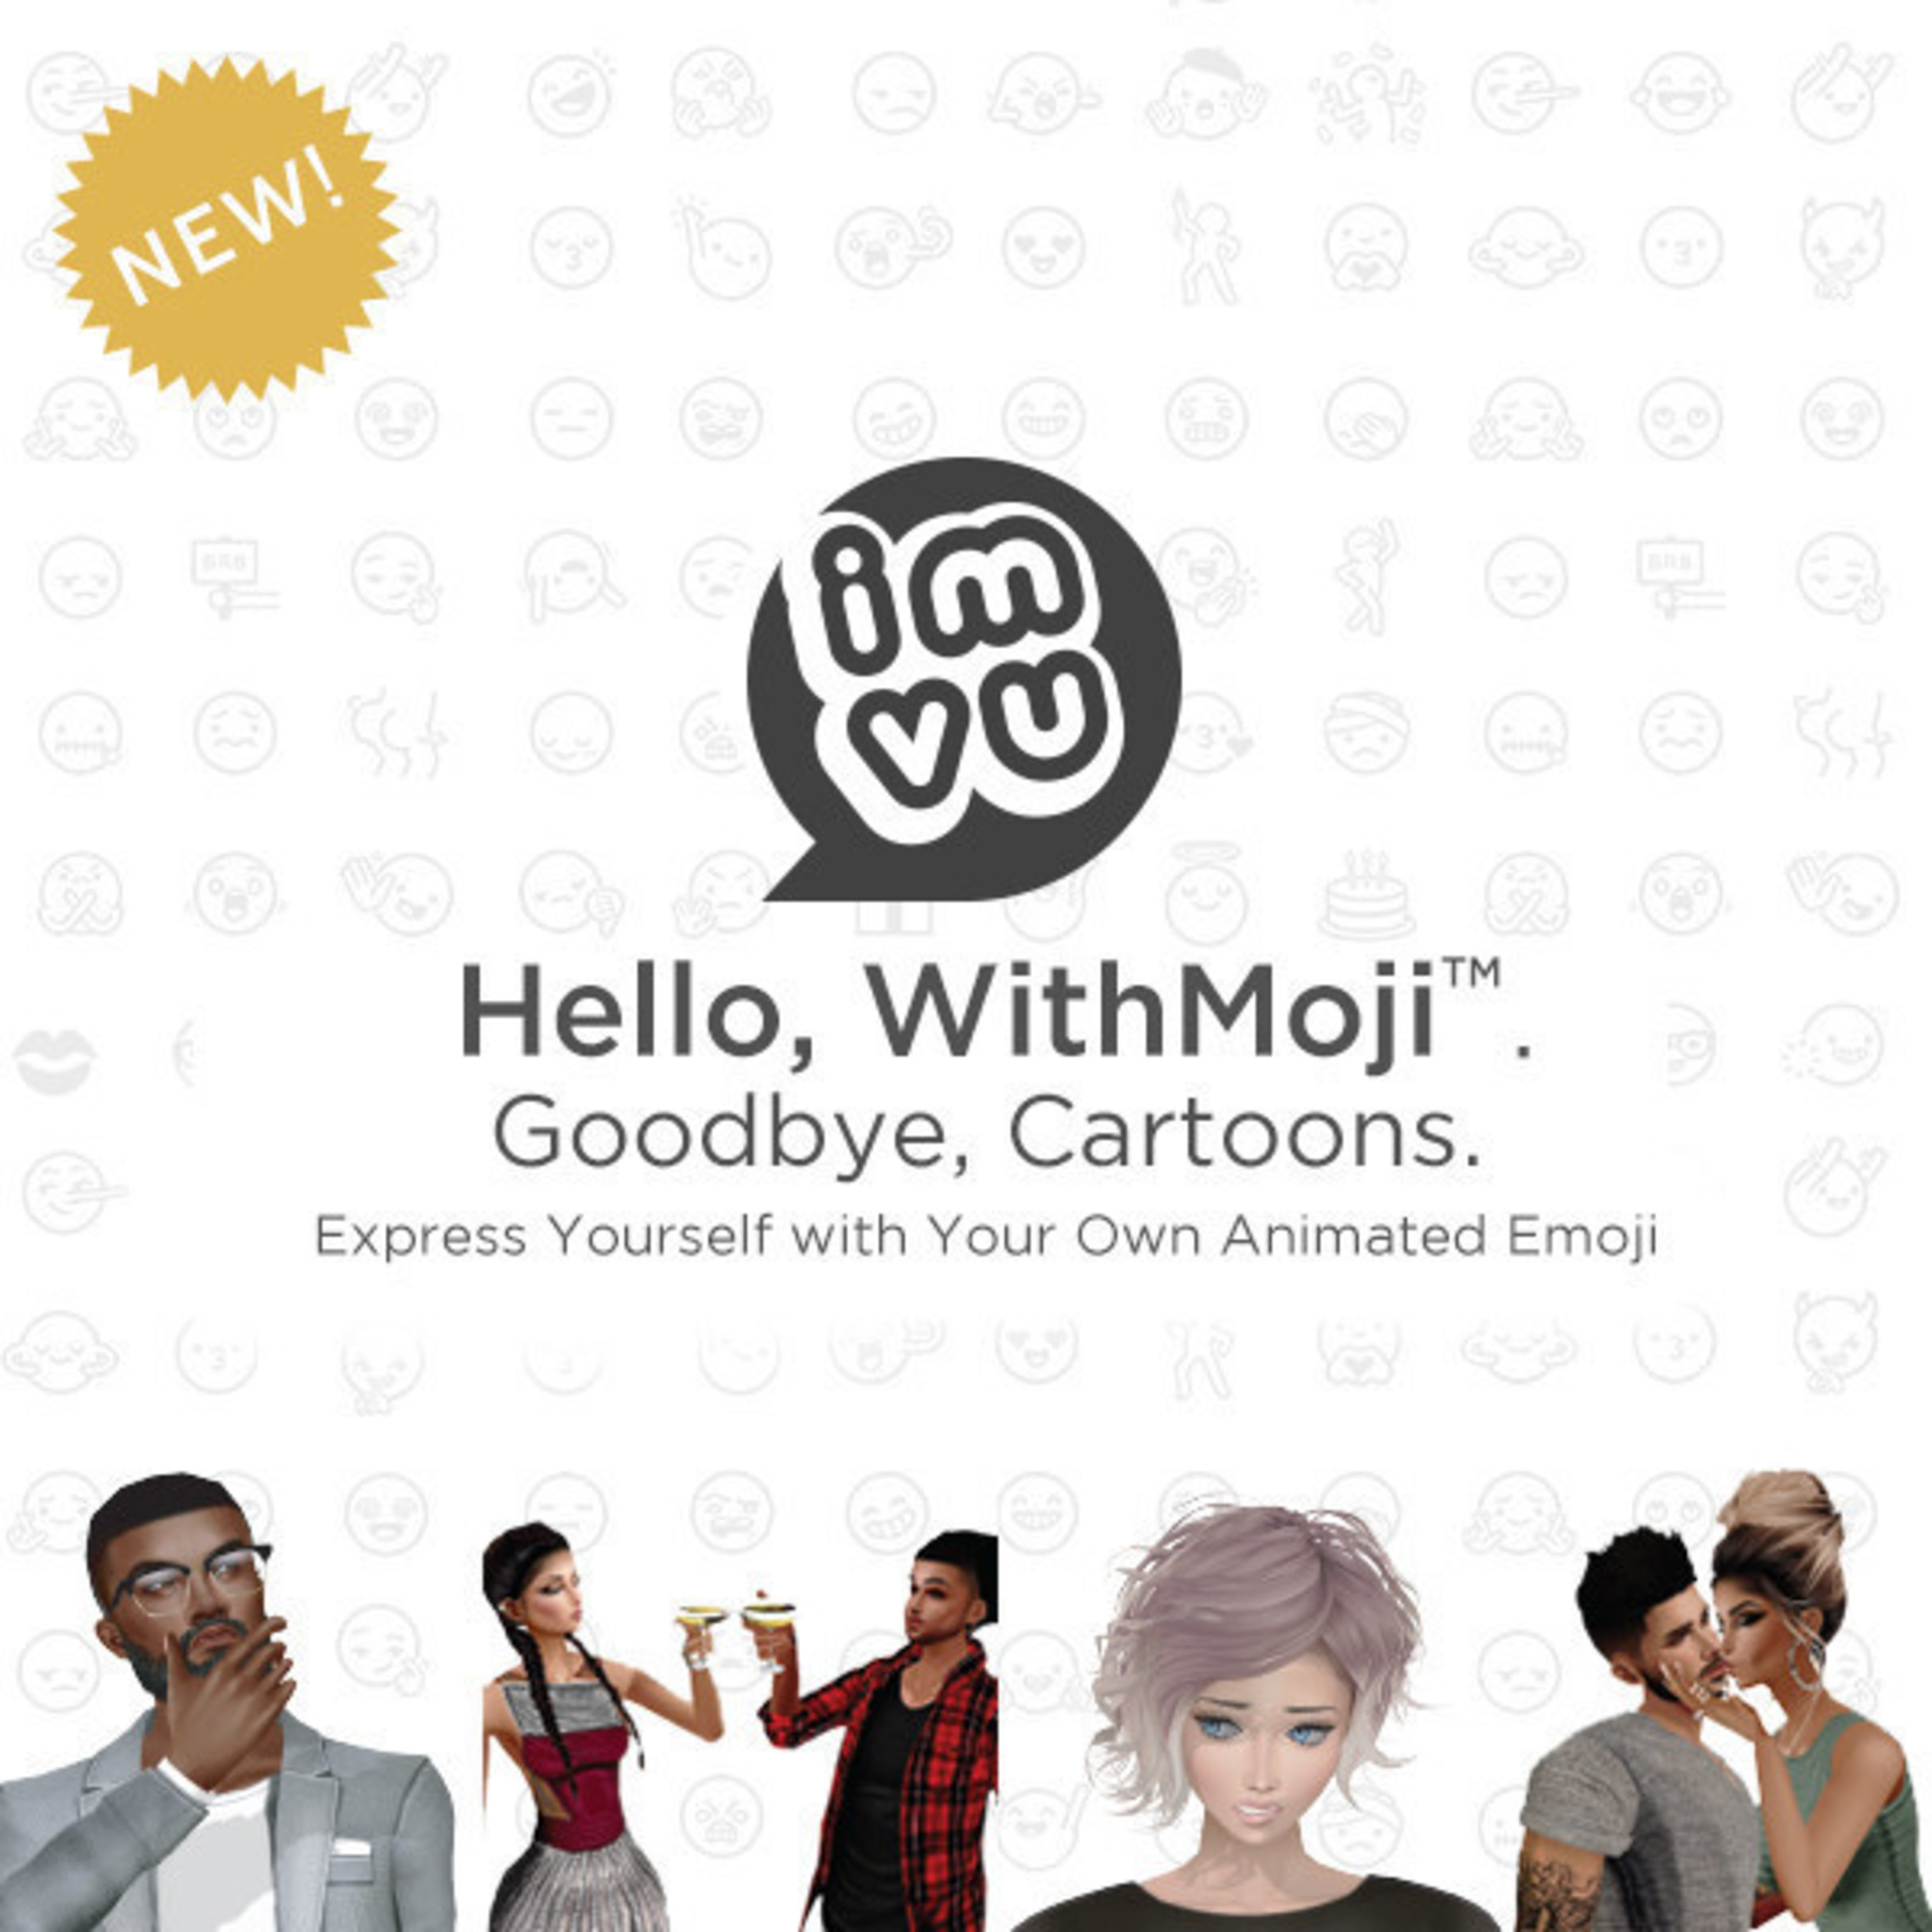 Hello, WithMoji(TM). Goodbye, Cartoons. Express Yourself with Your Own Animated Emoji